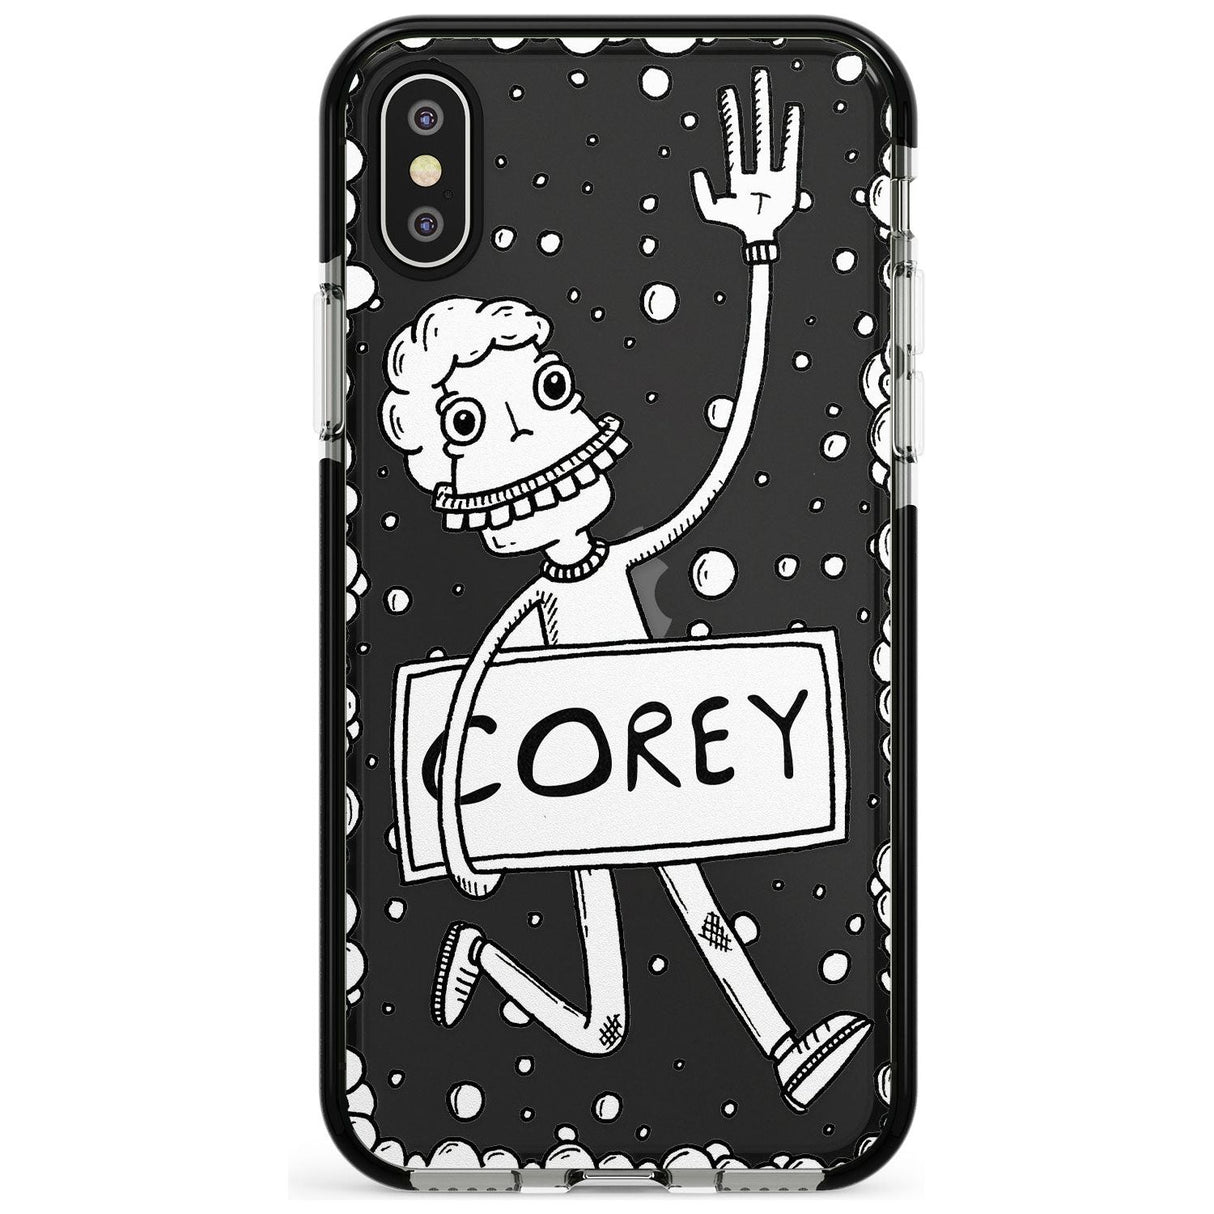 Personalised Custom Banner Boy Black Impact Phone Case for iPhone X XS Max XR